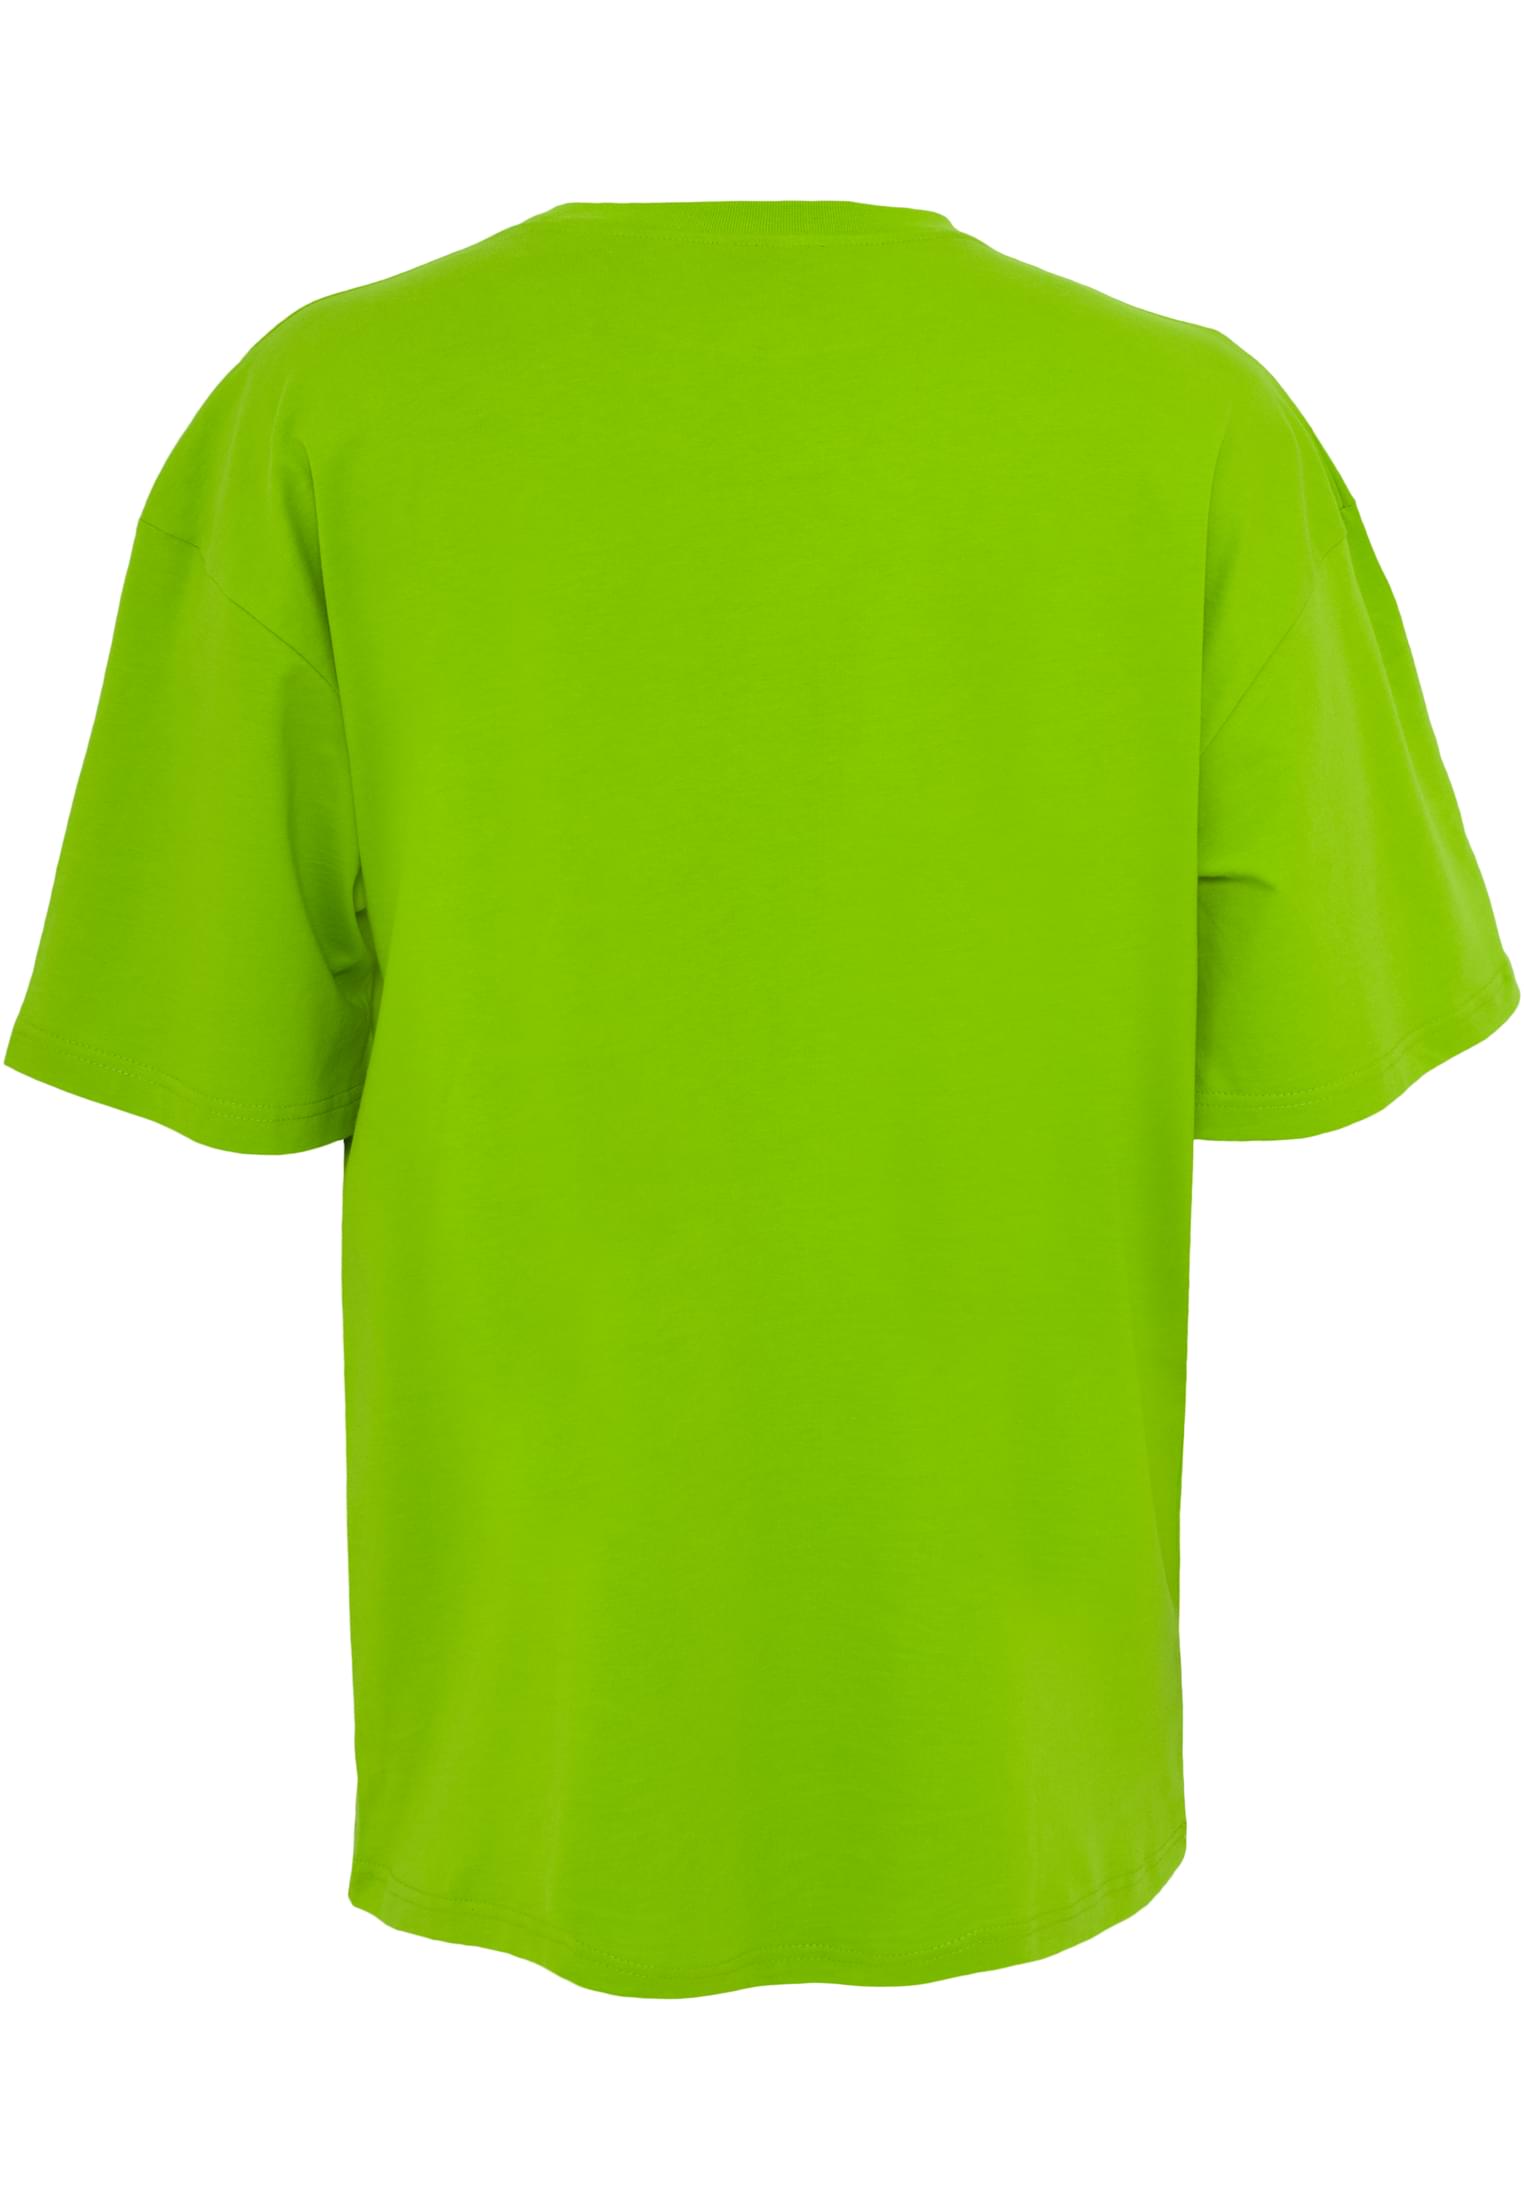 Plus Size Tall Tee in Farbe limegreen